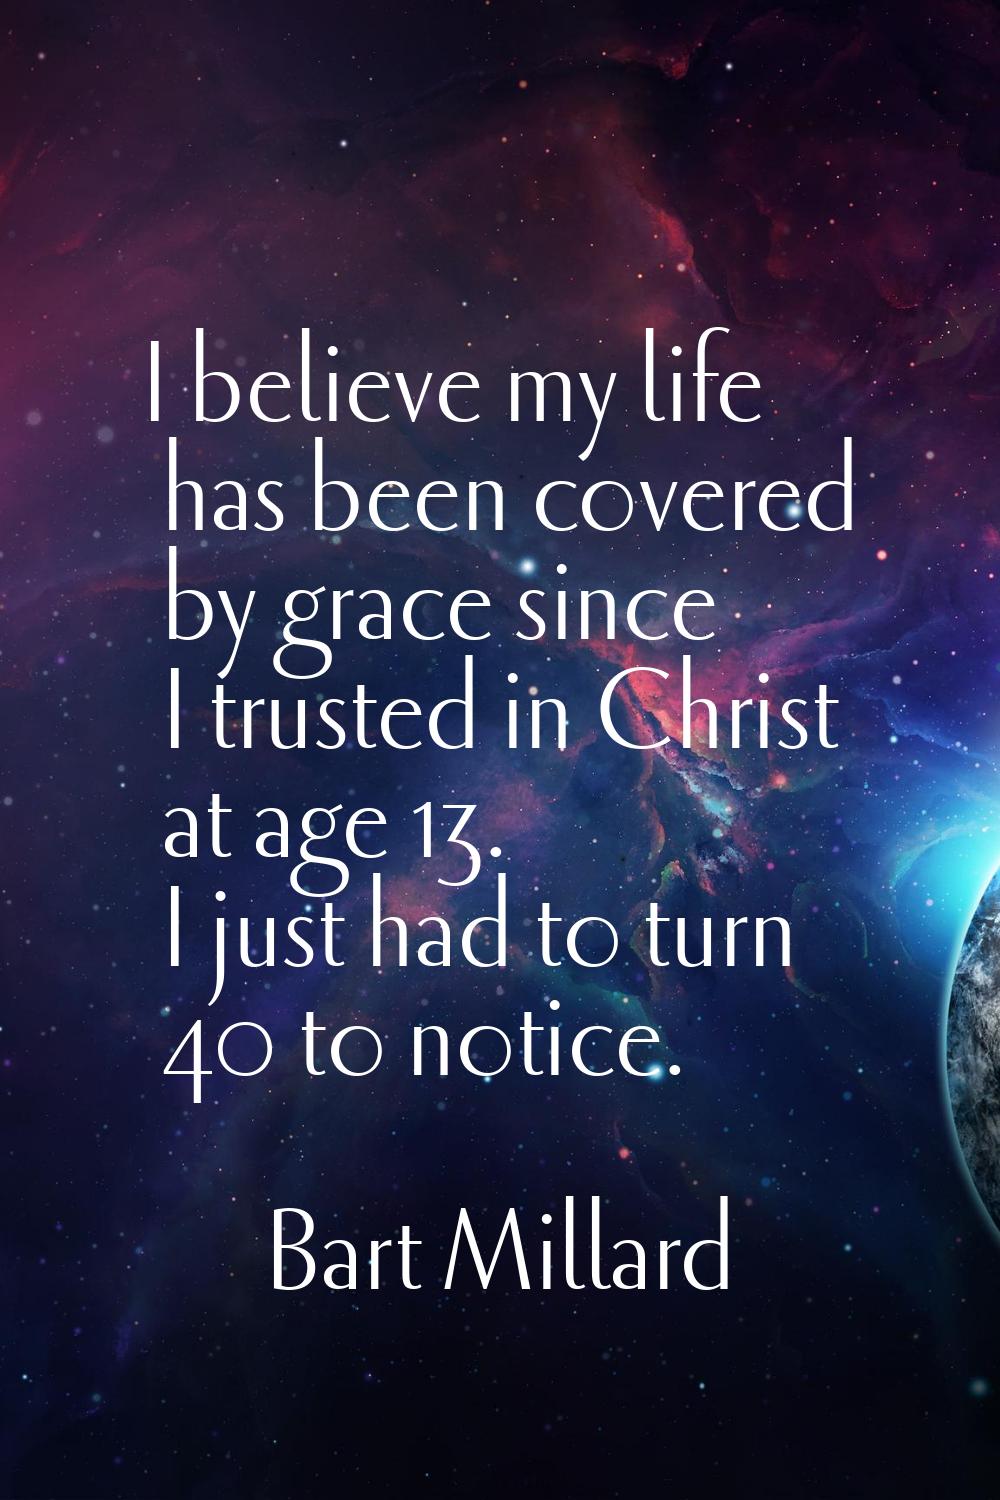 I believe my life has been covered by grace since I trusted in Christ at age 13. I just had to turn